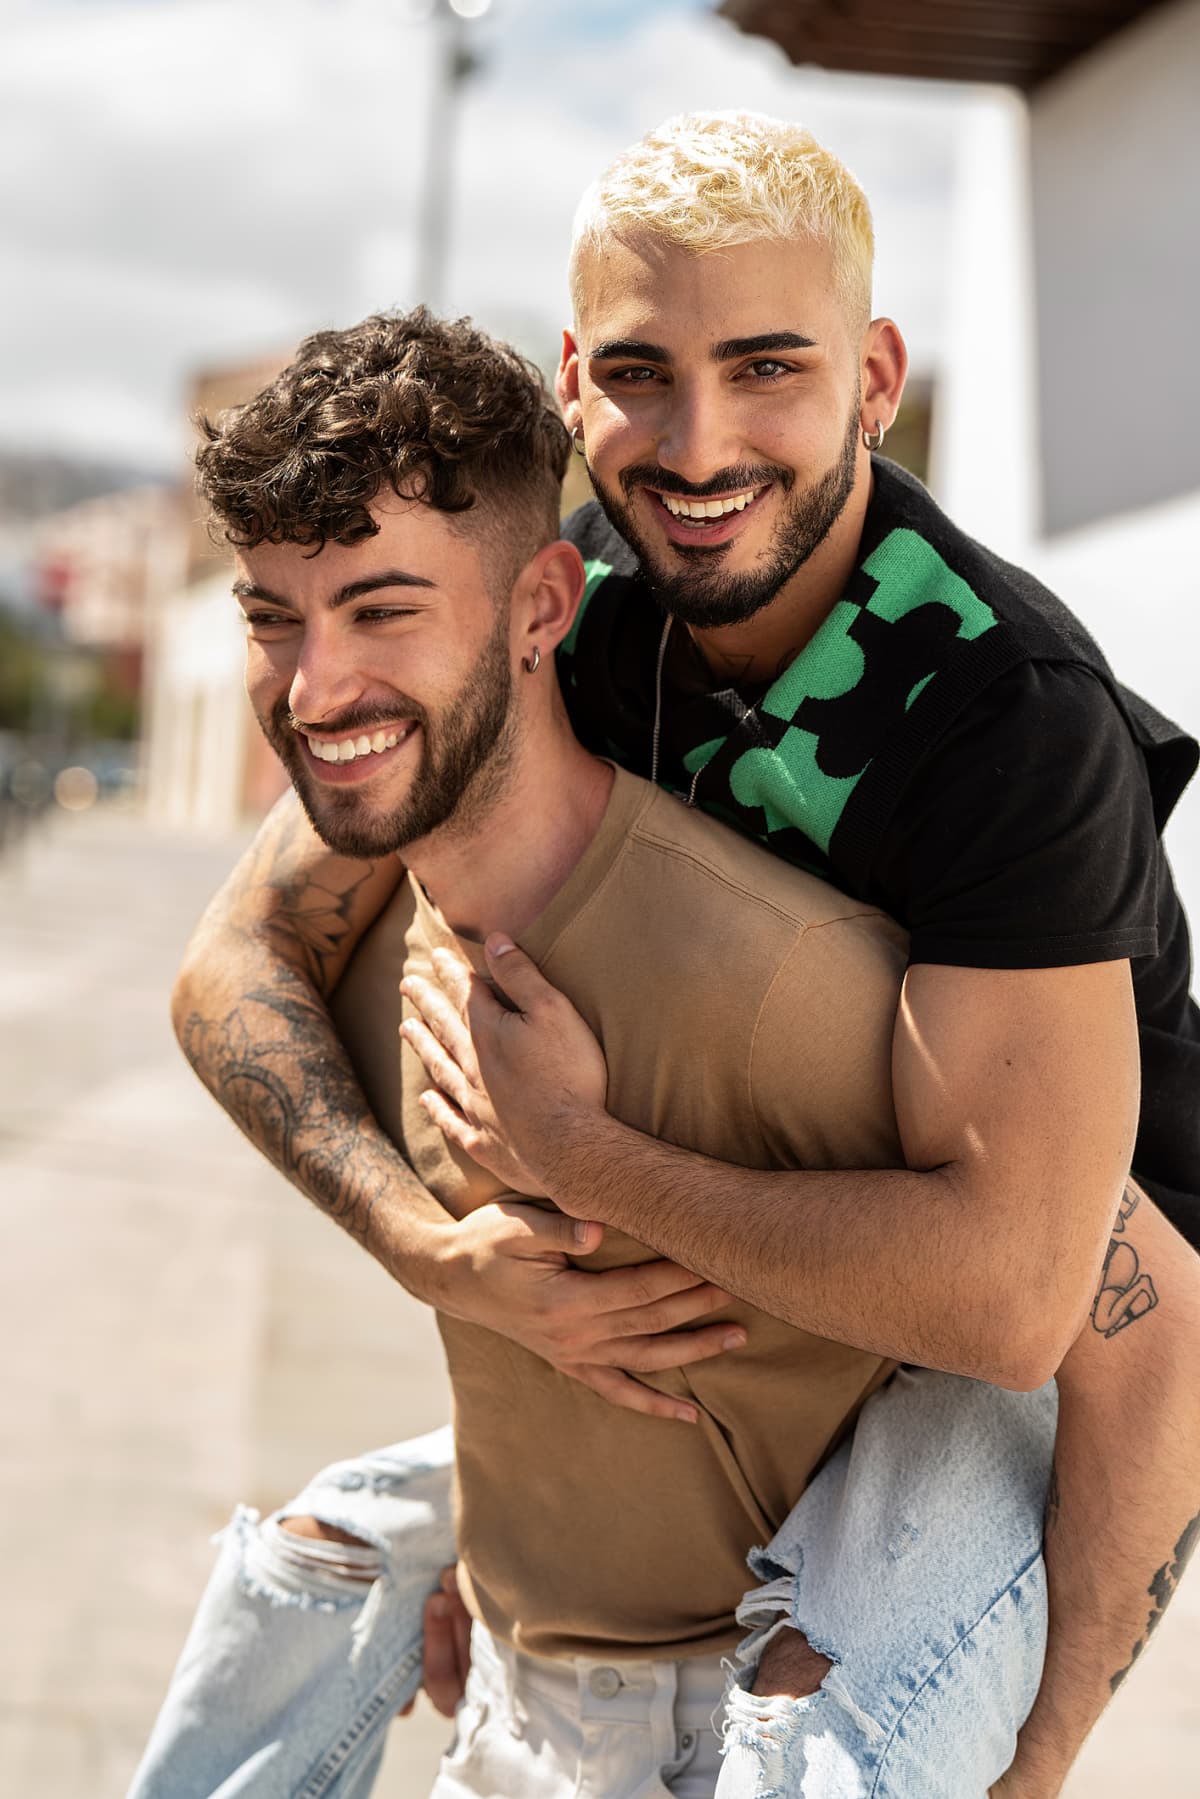 Man carrying his boyfriend on his back